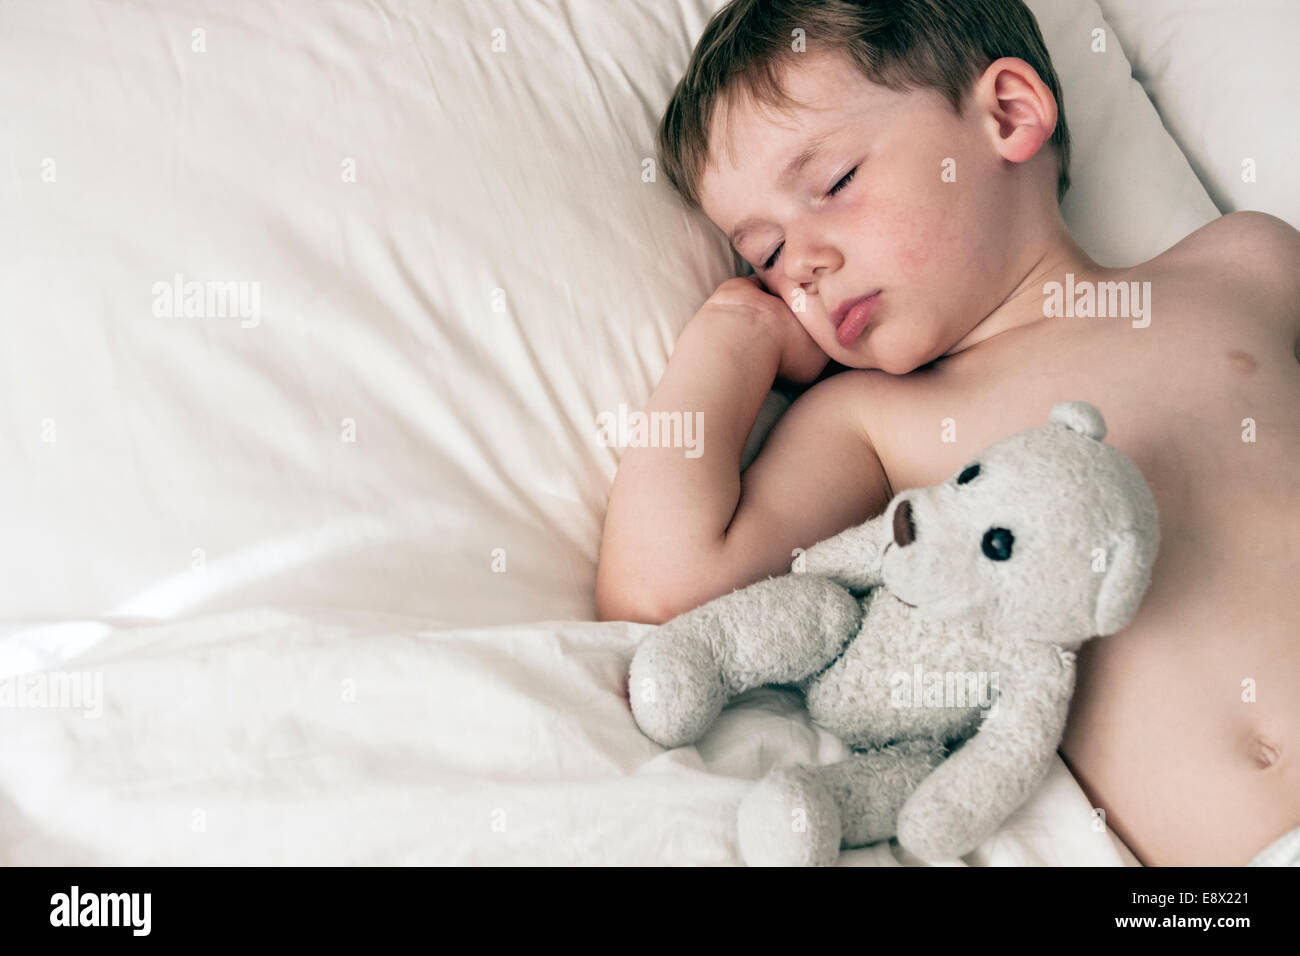 Young Boy asleep in bed Stock Photo